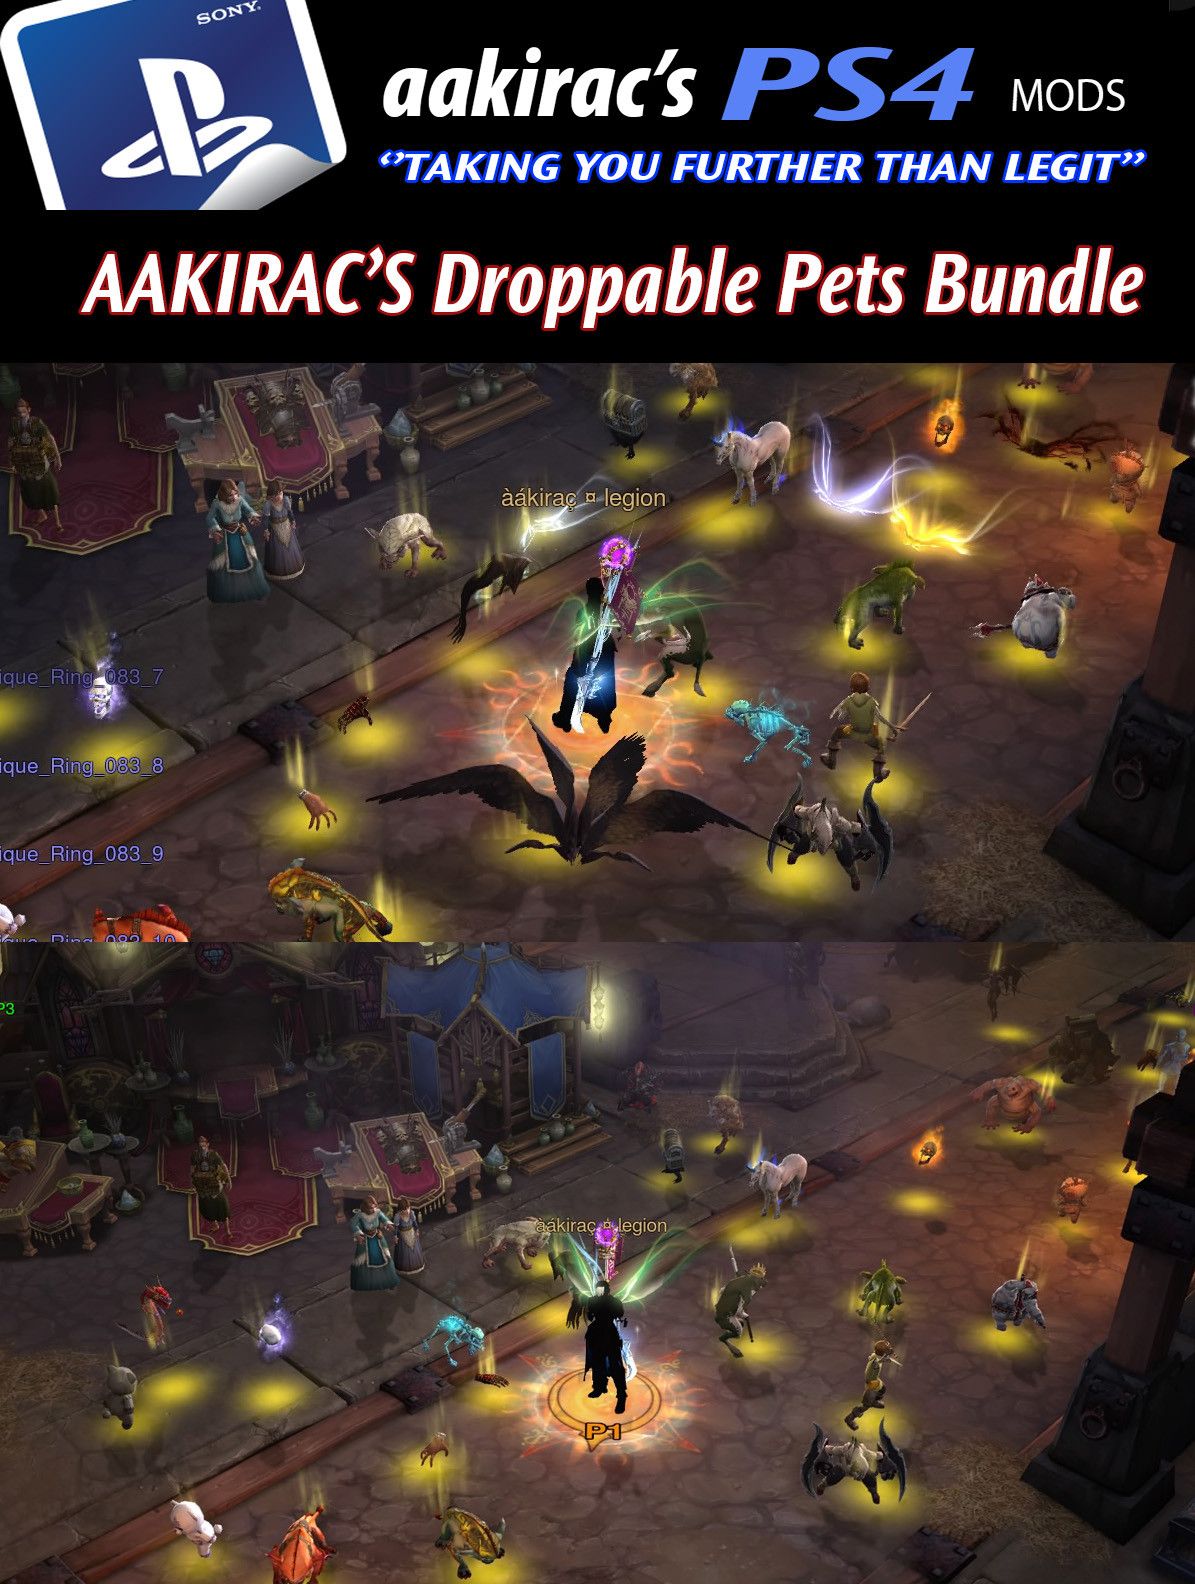 25x Random Picked Droppable Pets Diablo 3 Mods ROS Seasonal and Non Seasonal Save Mod - Modded Items and Gear - Hacks - Cheats - Trainers for Playstation 4 - Playstation 5 - Nintendo Switch - Xbox One